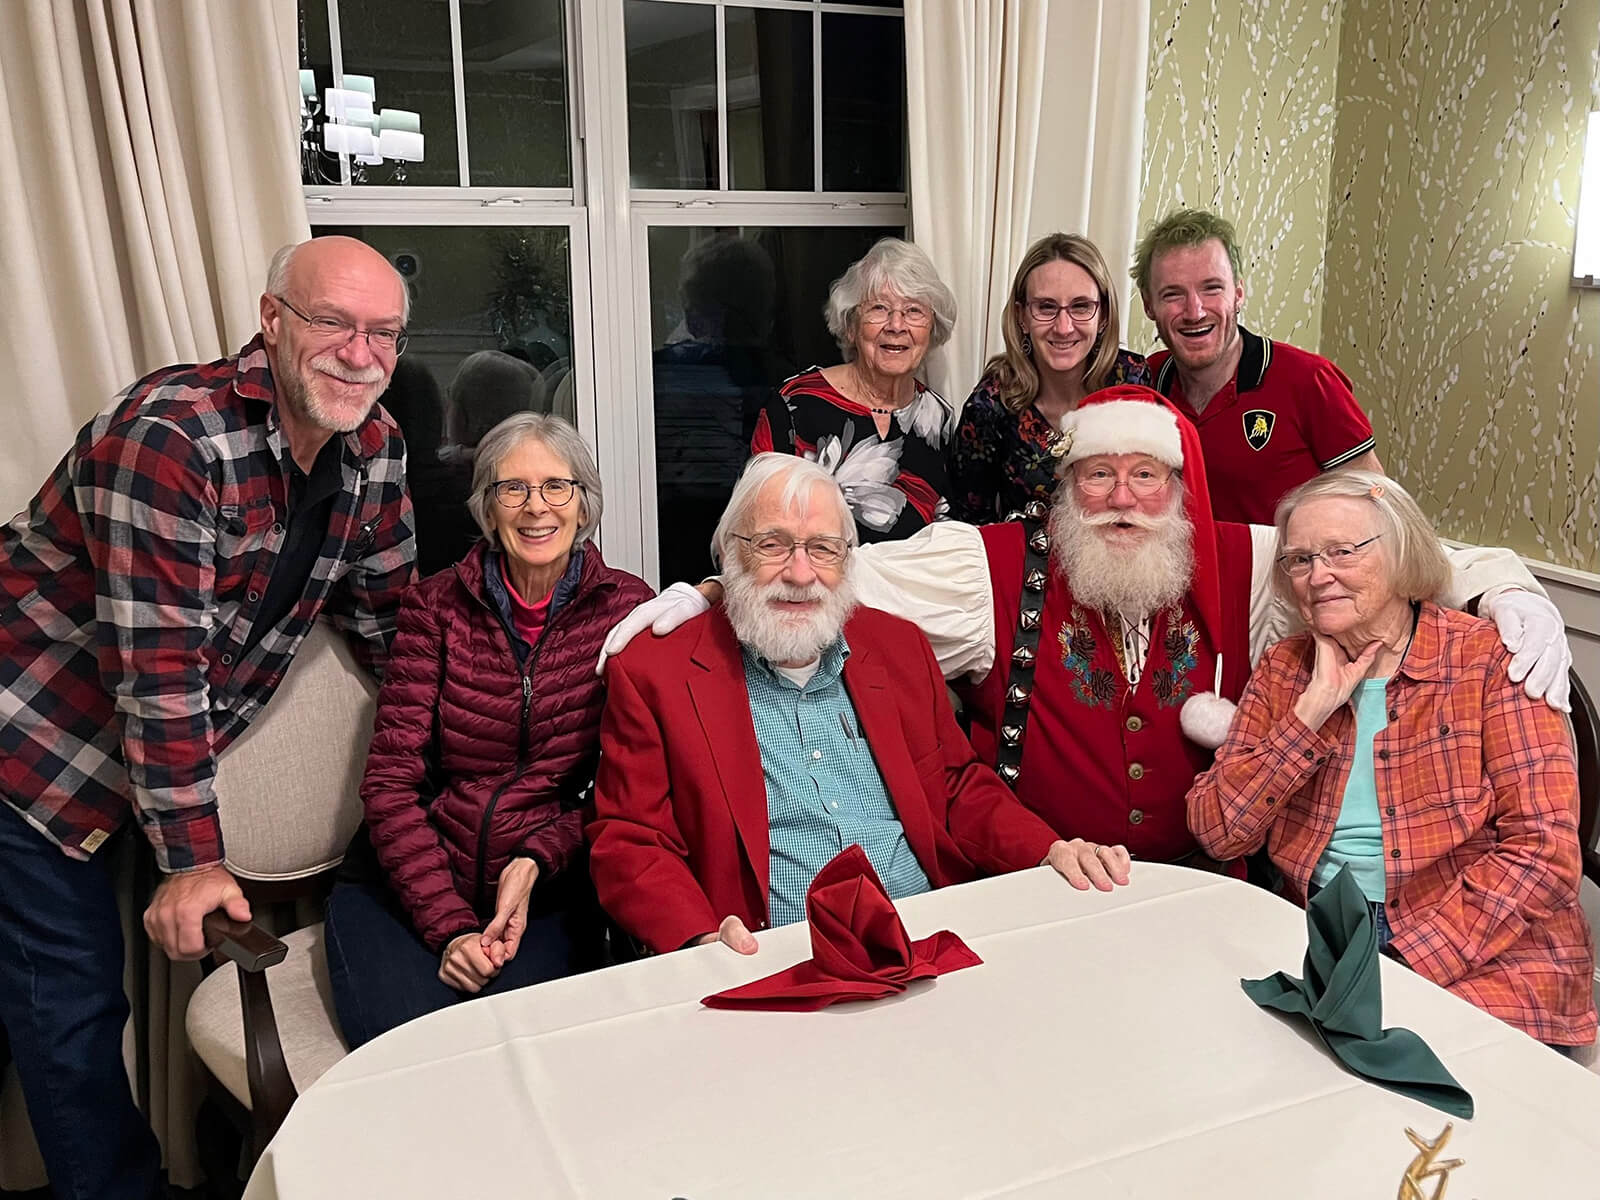 Residents of The Waters of Oakdale enjoying a festive holiday celebration with a Santa Claus impersonator, embodying the community's holiday spirit.